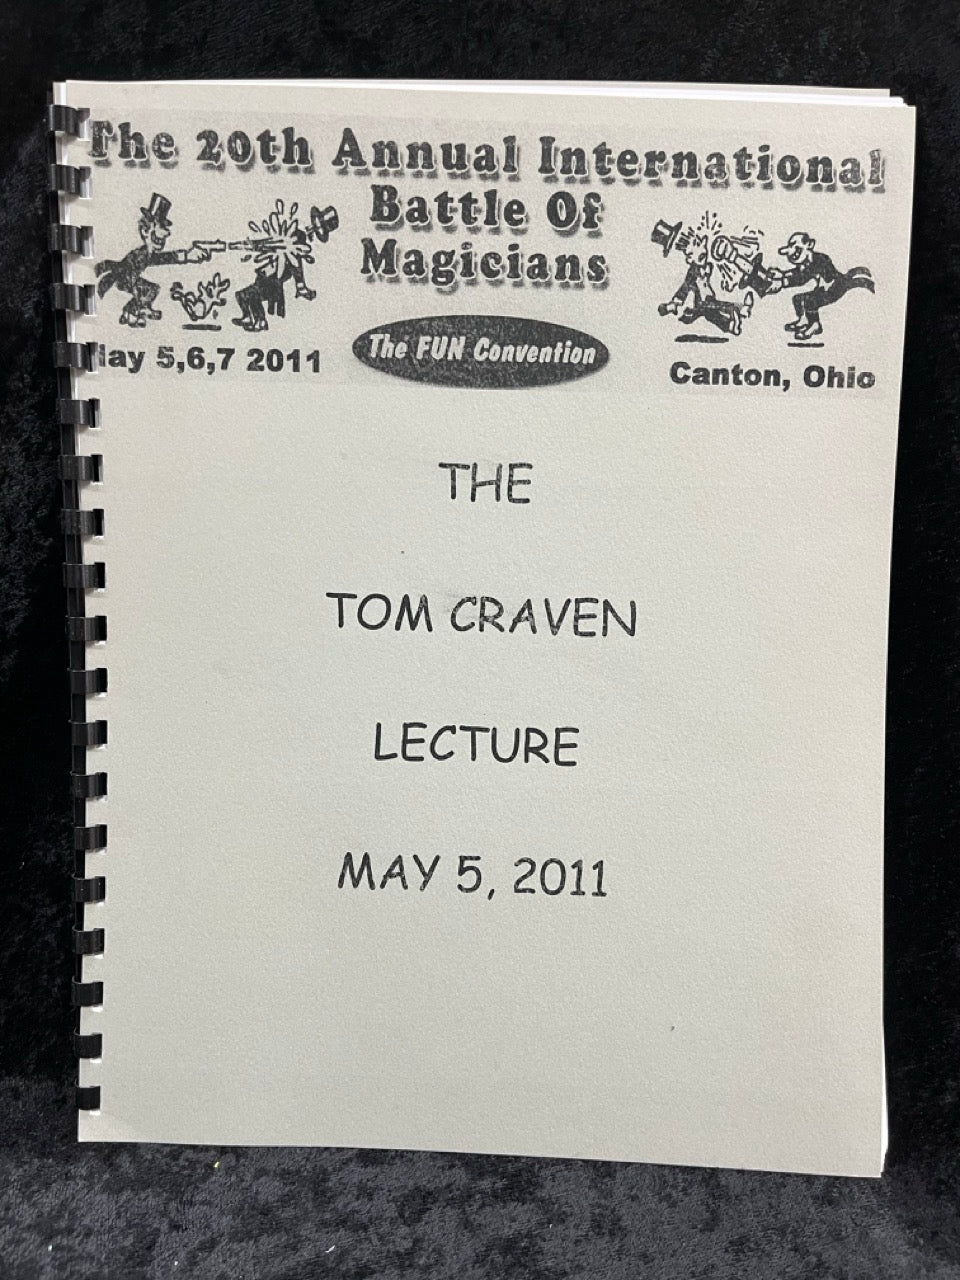 The 29th Annual International Battle of Magicians Lecture Notes - Tom Craven